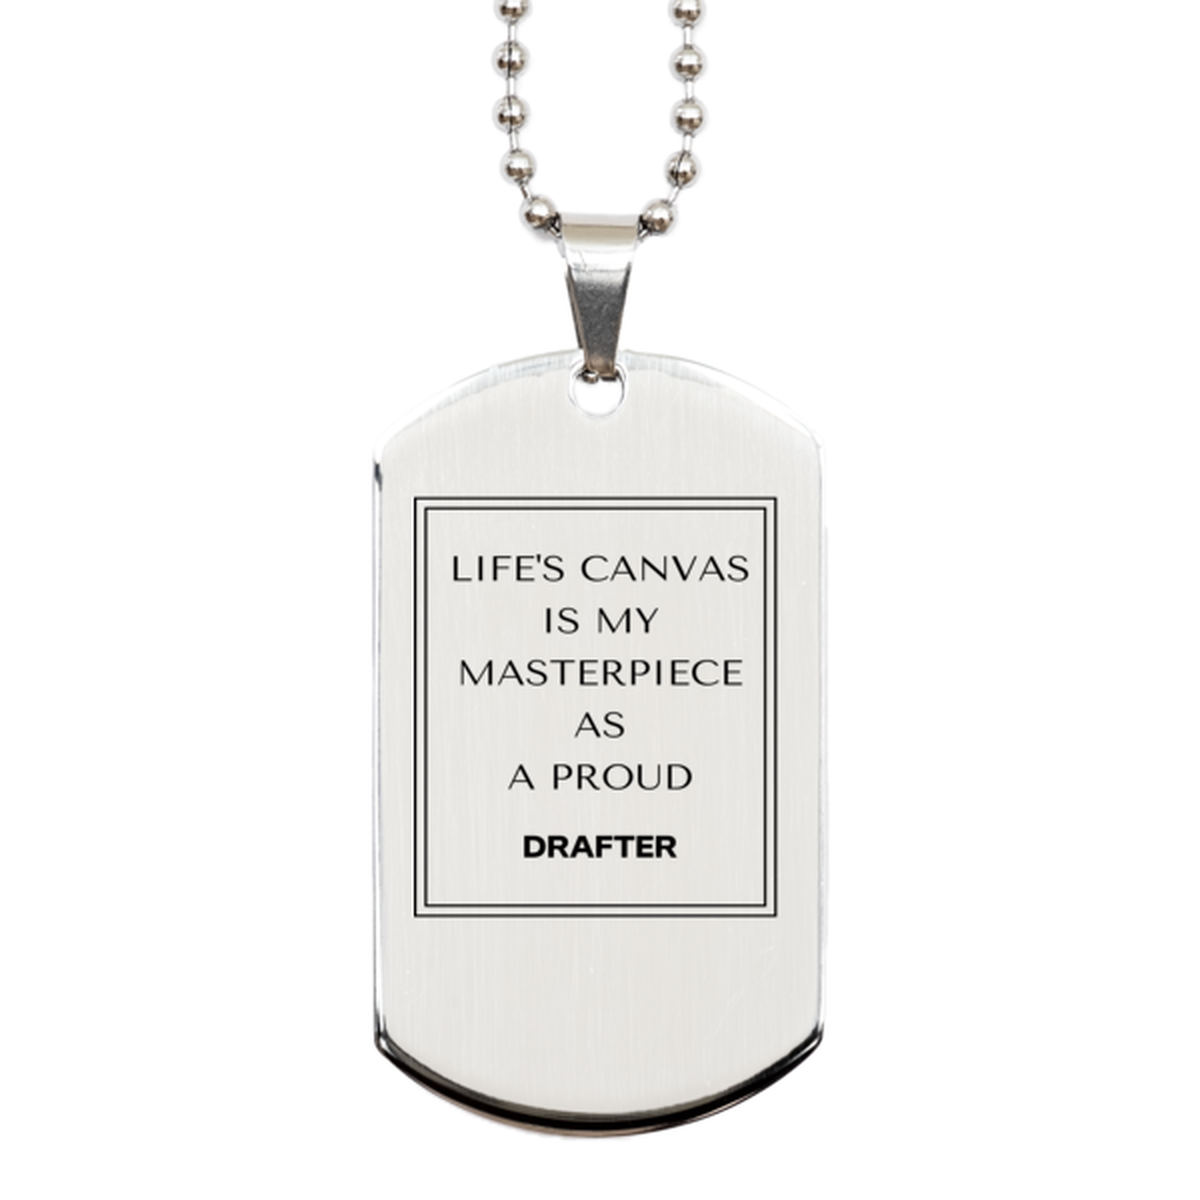 Proud Drafter Gifts, Life's canvas is my masterpiece, Epic Birthday Christmas Unique Silver Dog Tag For Drafter, Coworkers, Men, Women, Friends